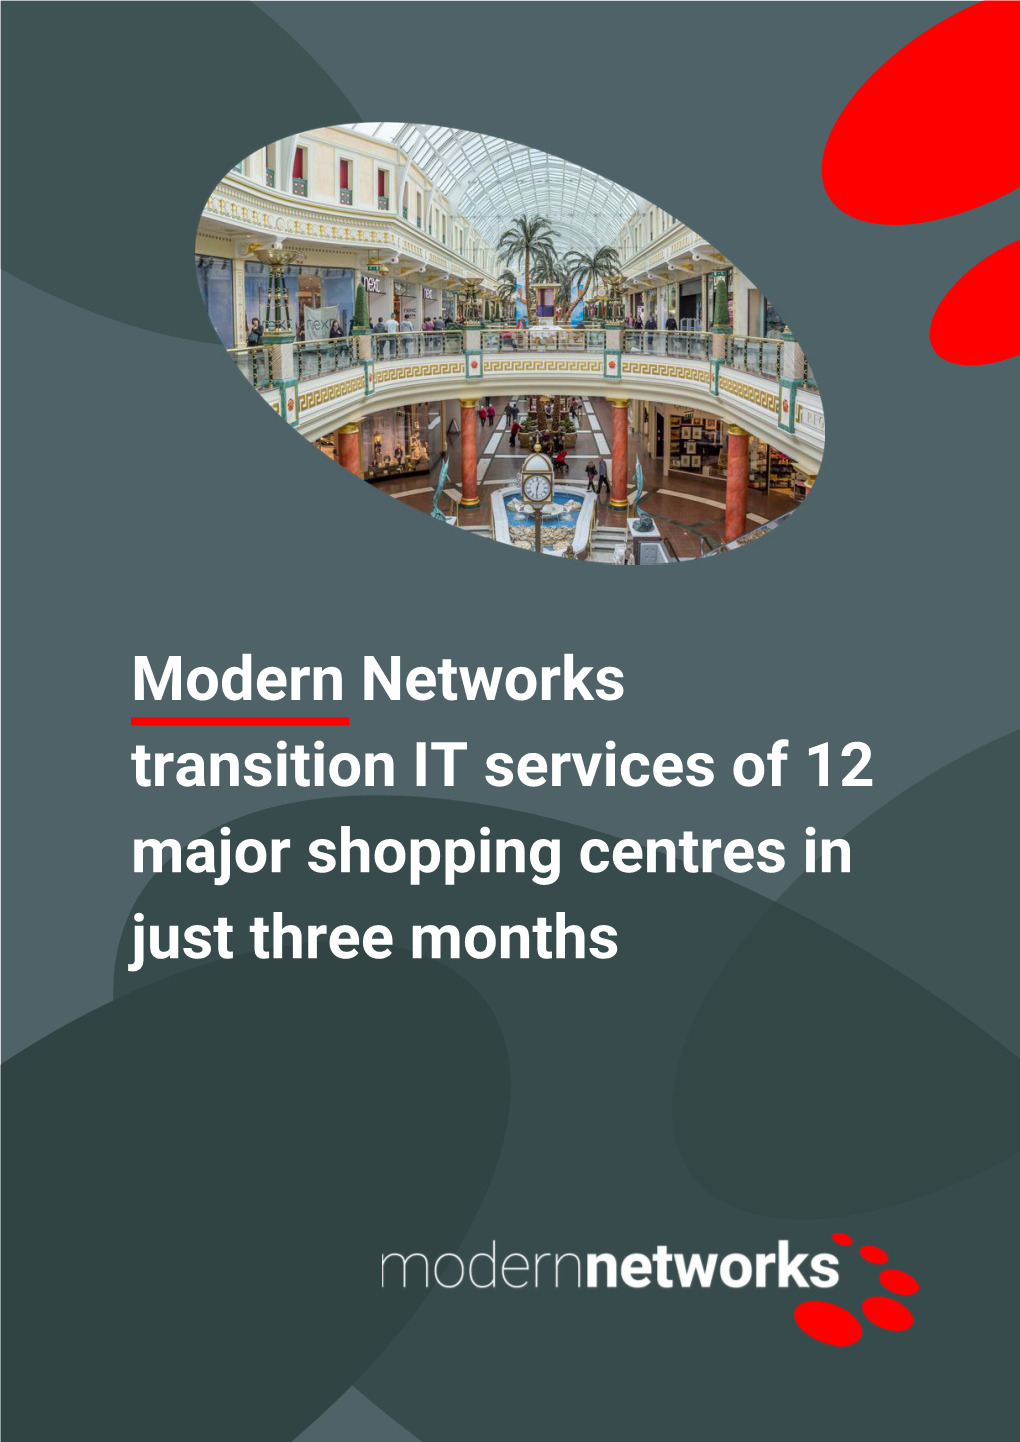 Modern Networks Transition IT Services of 12 Major Shopping Centres in Just Three Months Online Meetings